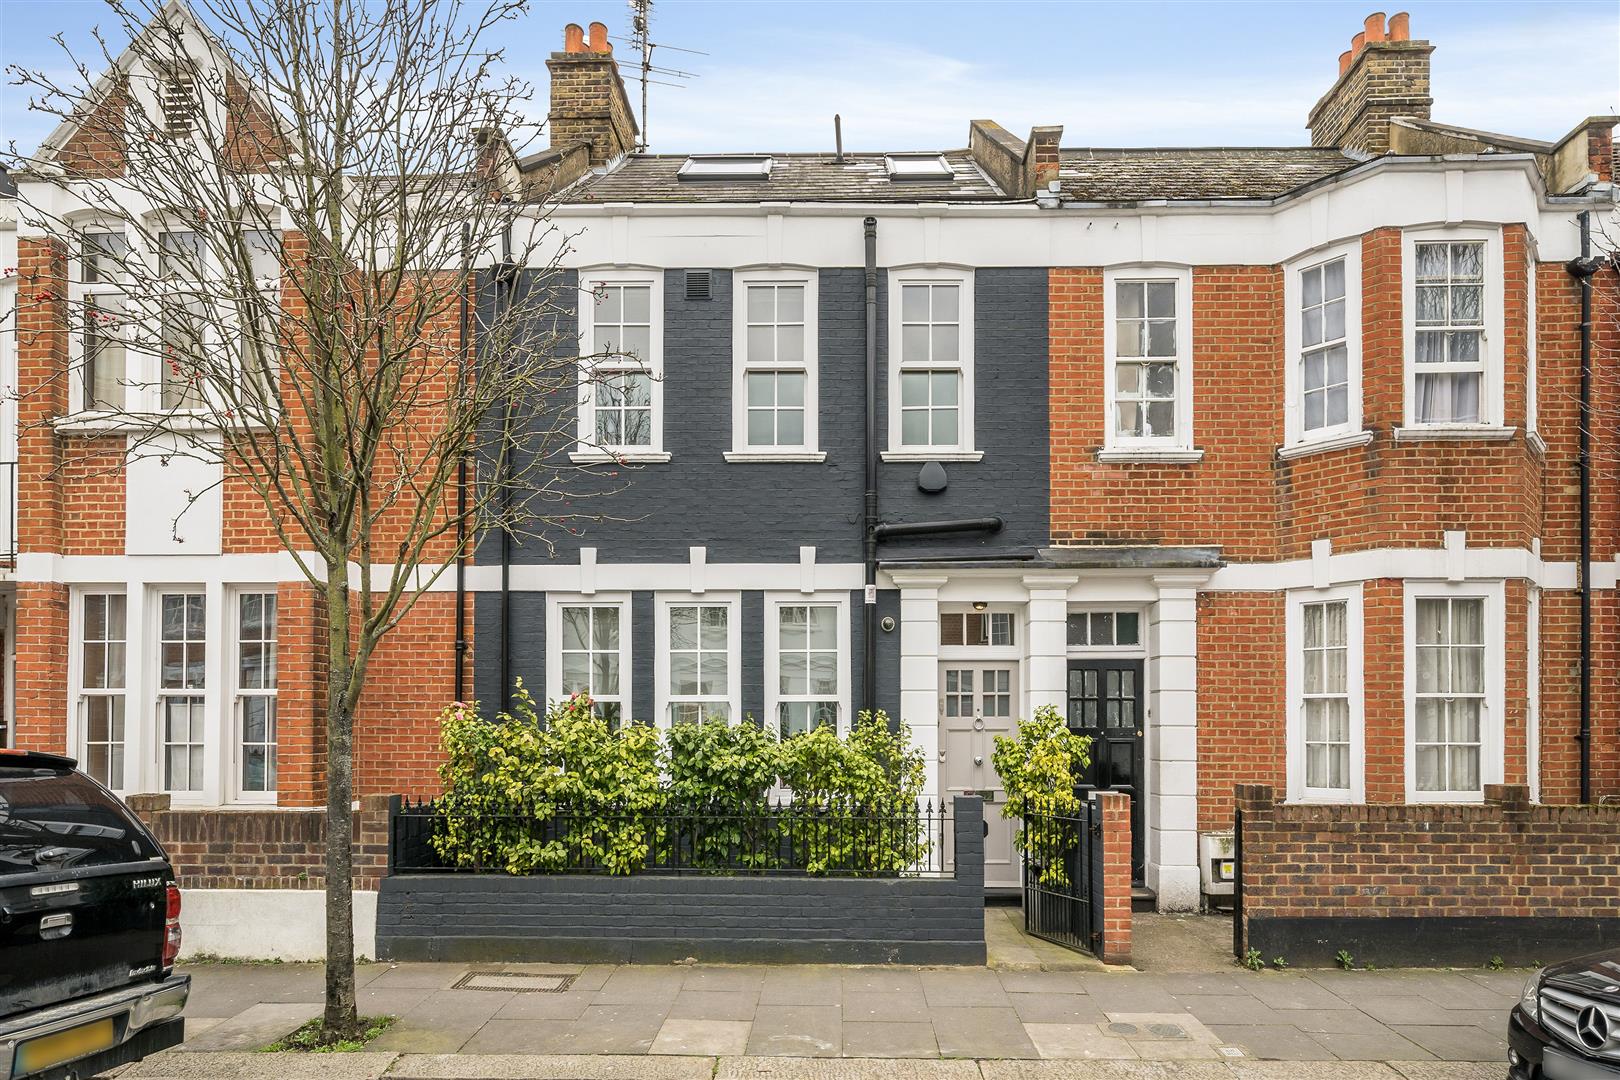 5 bedroom House for sale in London